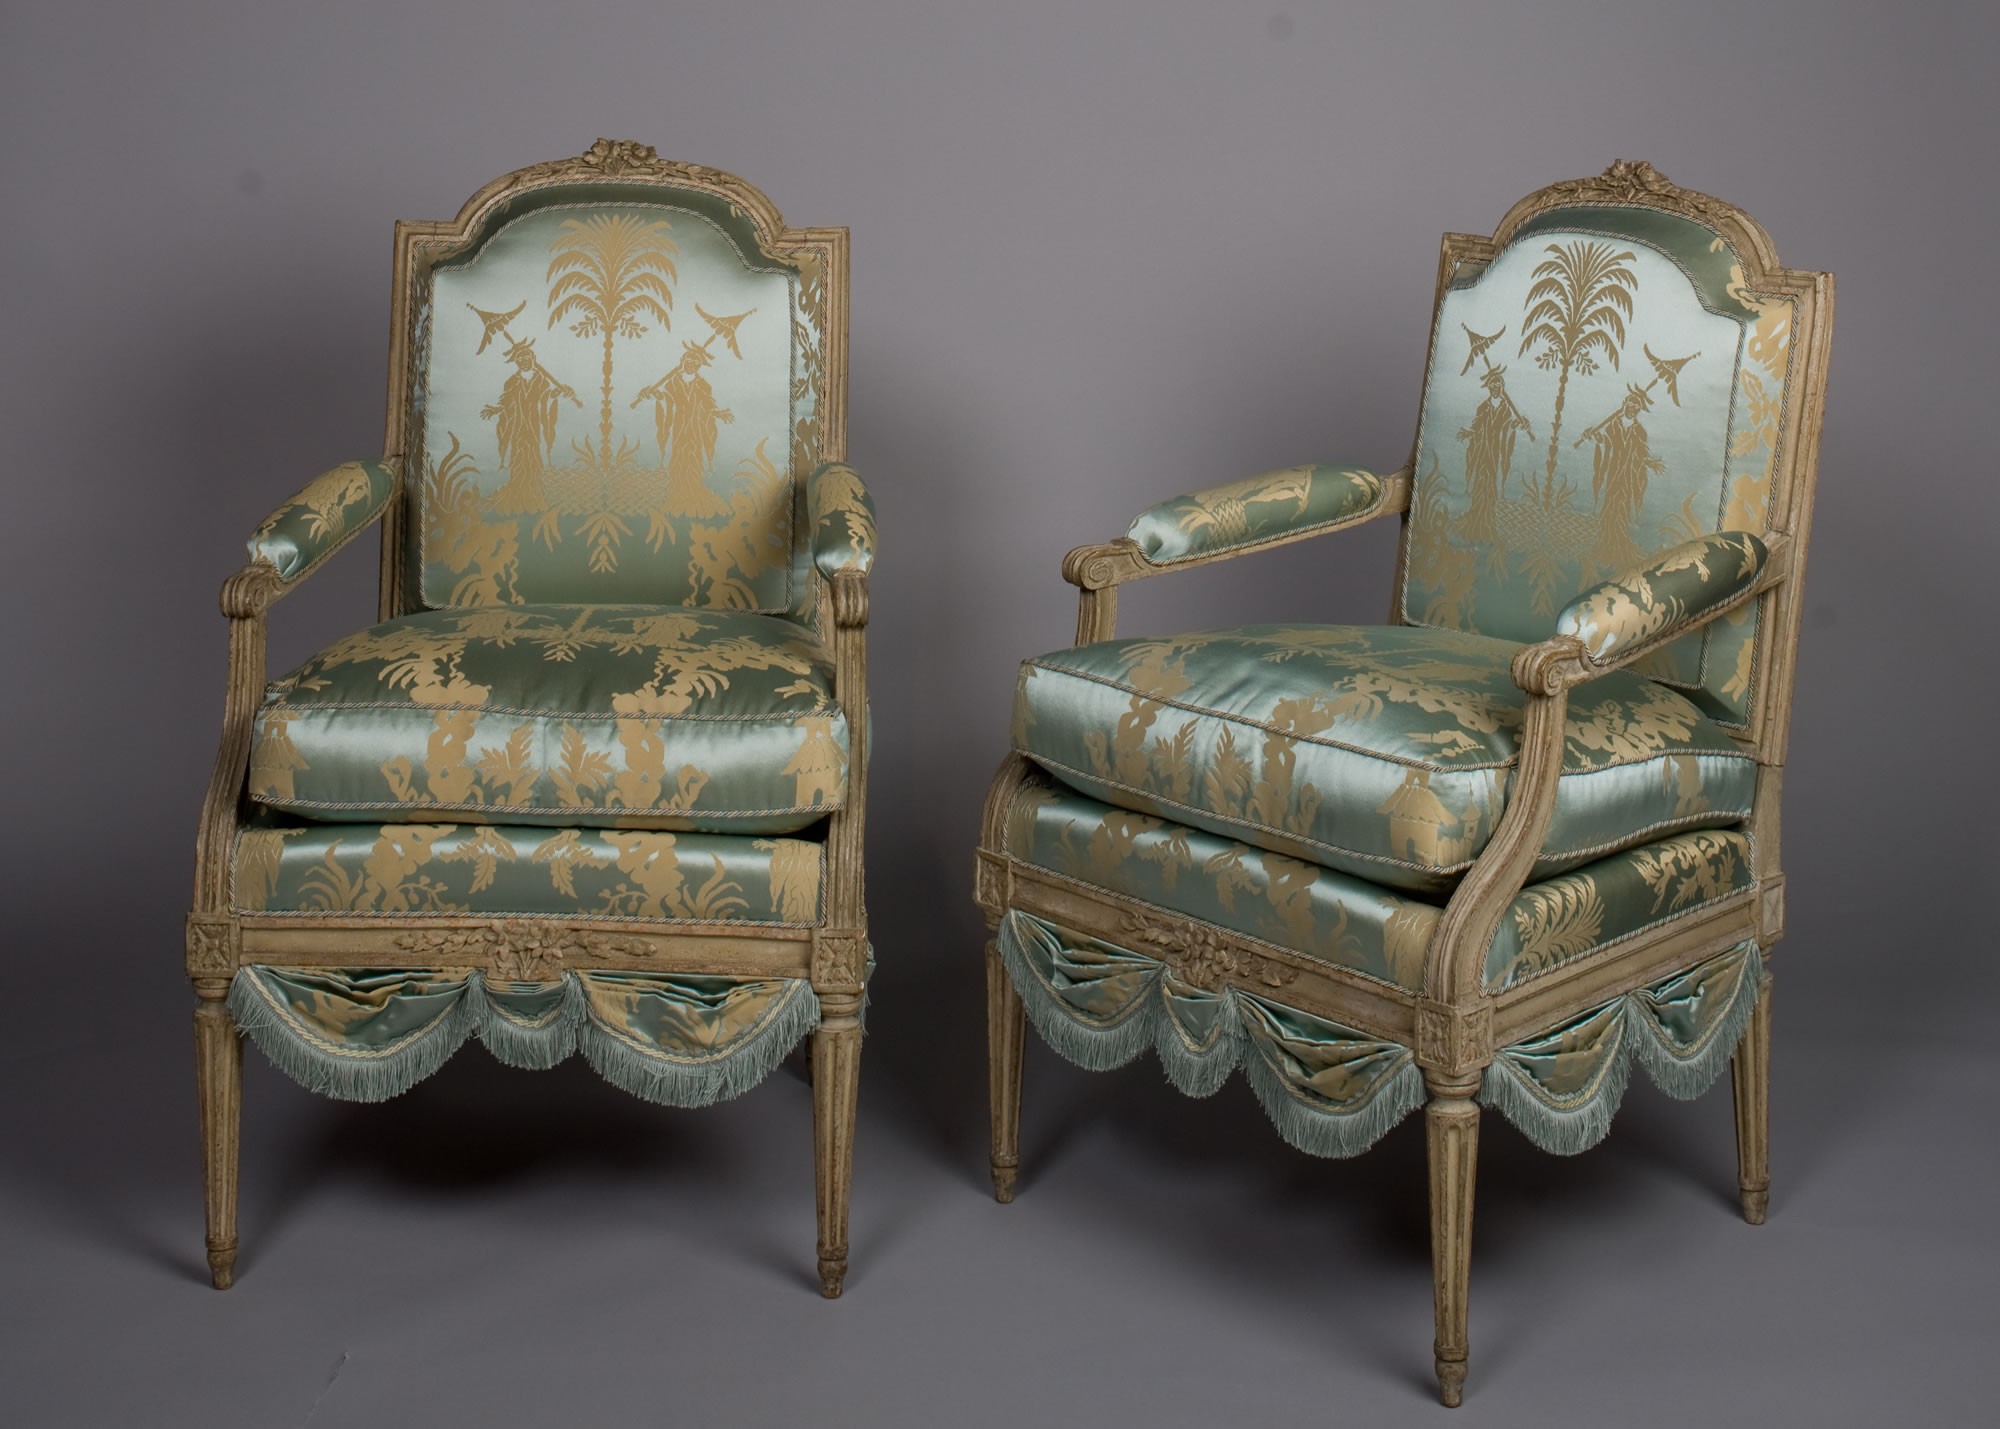 French Louis XVI Period, Painted, Beechwood Fauteuils attributed to, “C. SÉNÉ”